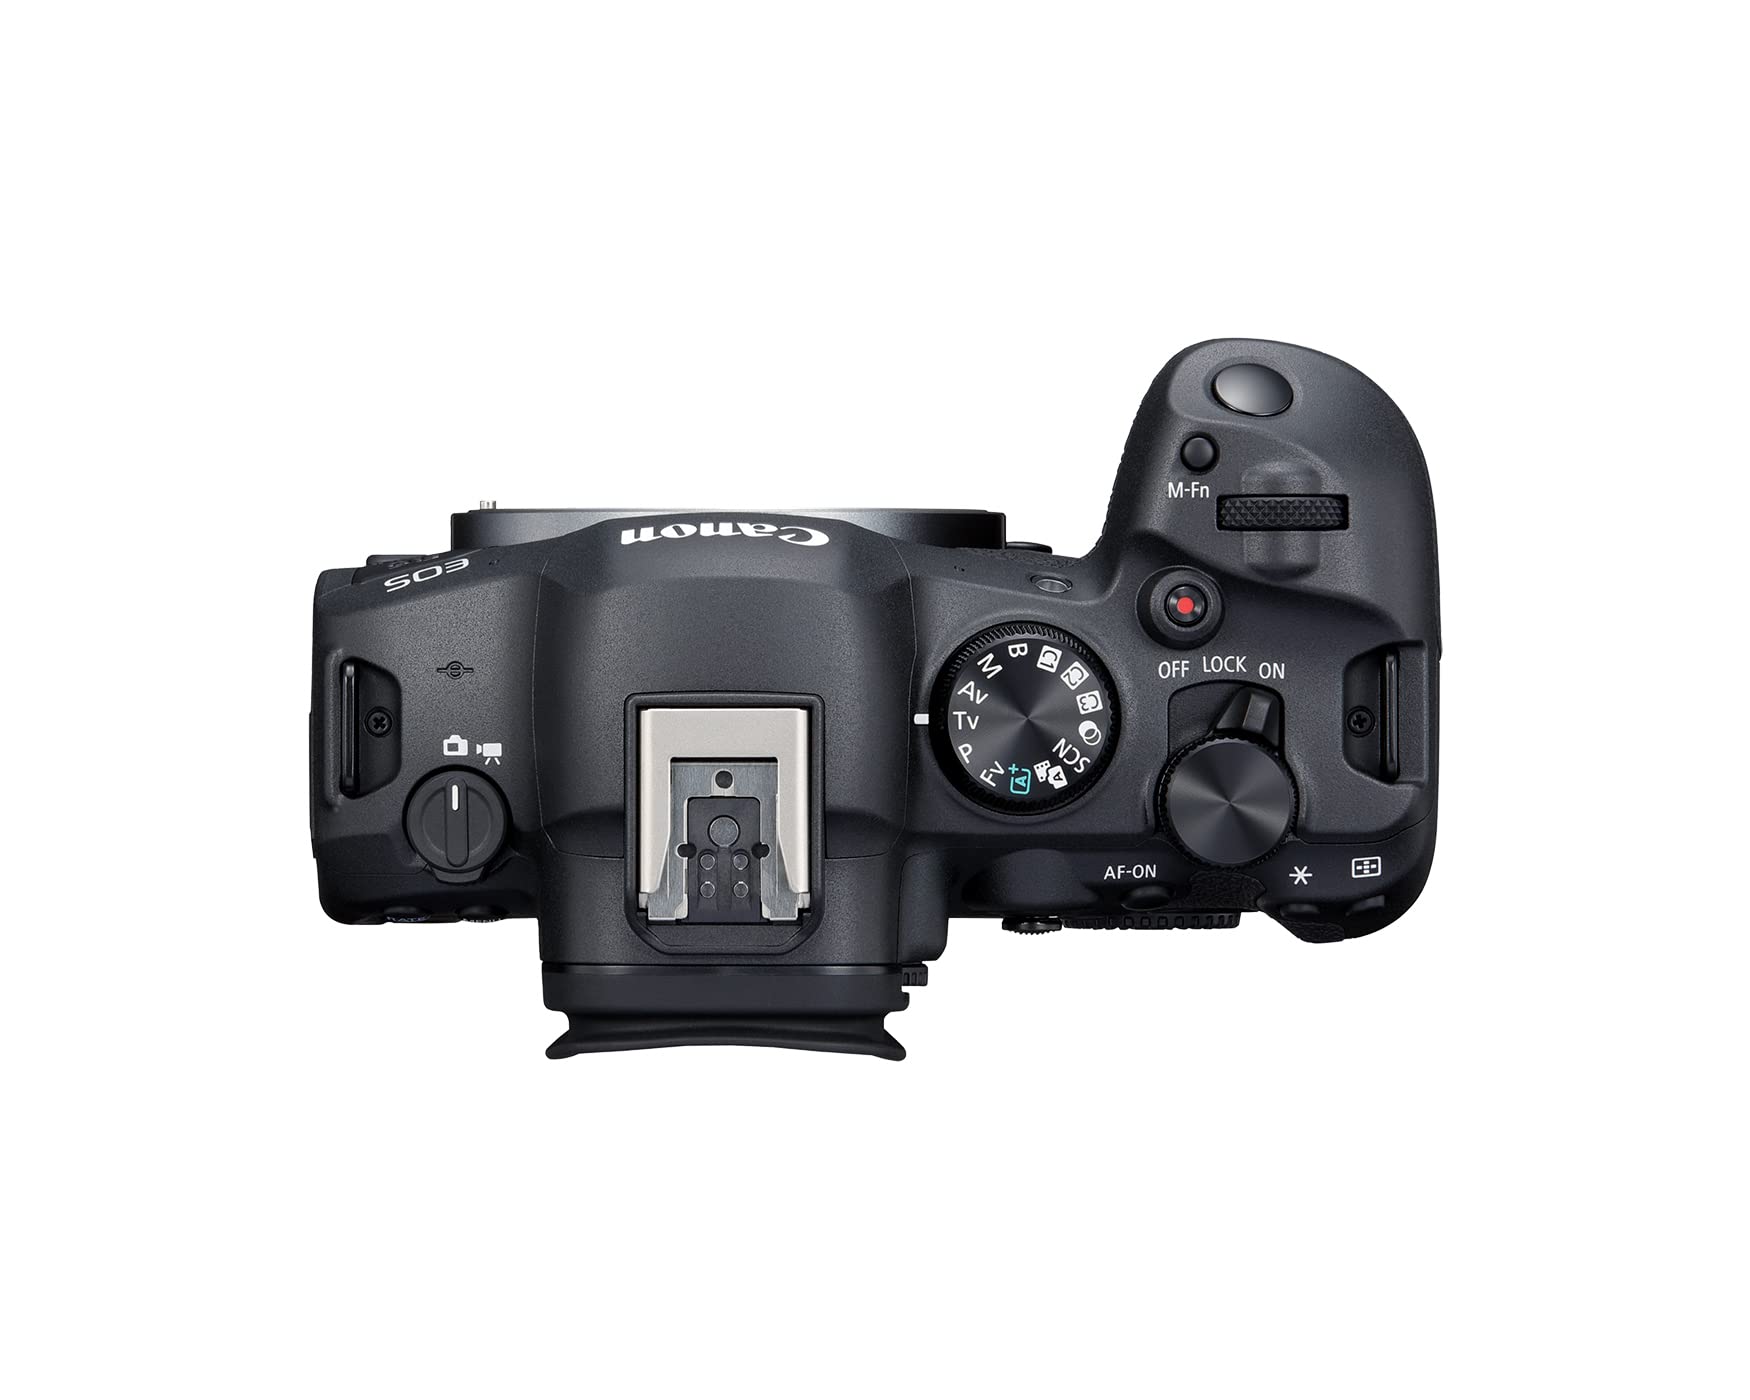 Canon EOS R6 Mark II Body with Stop Motion Animation Firmware